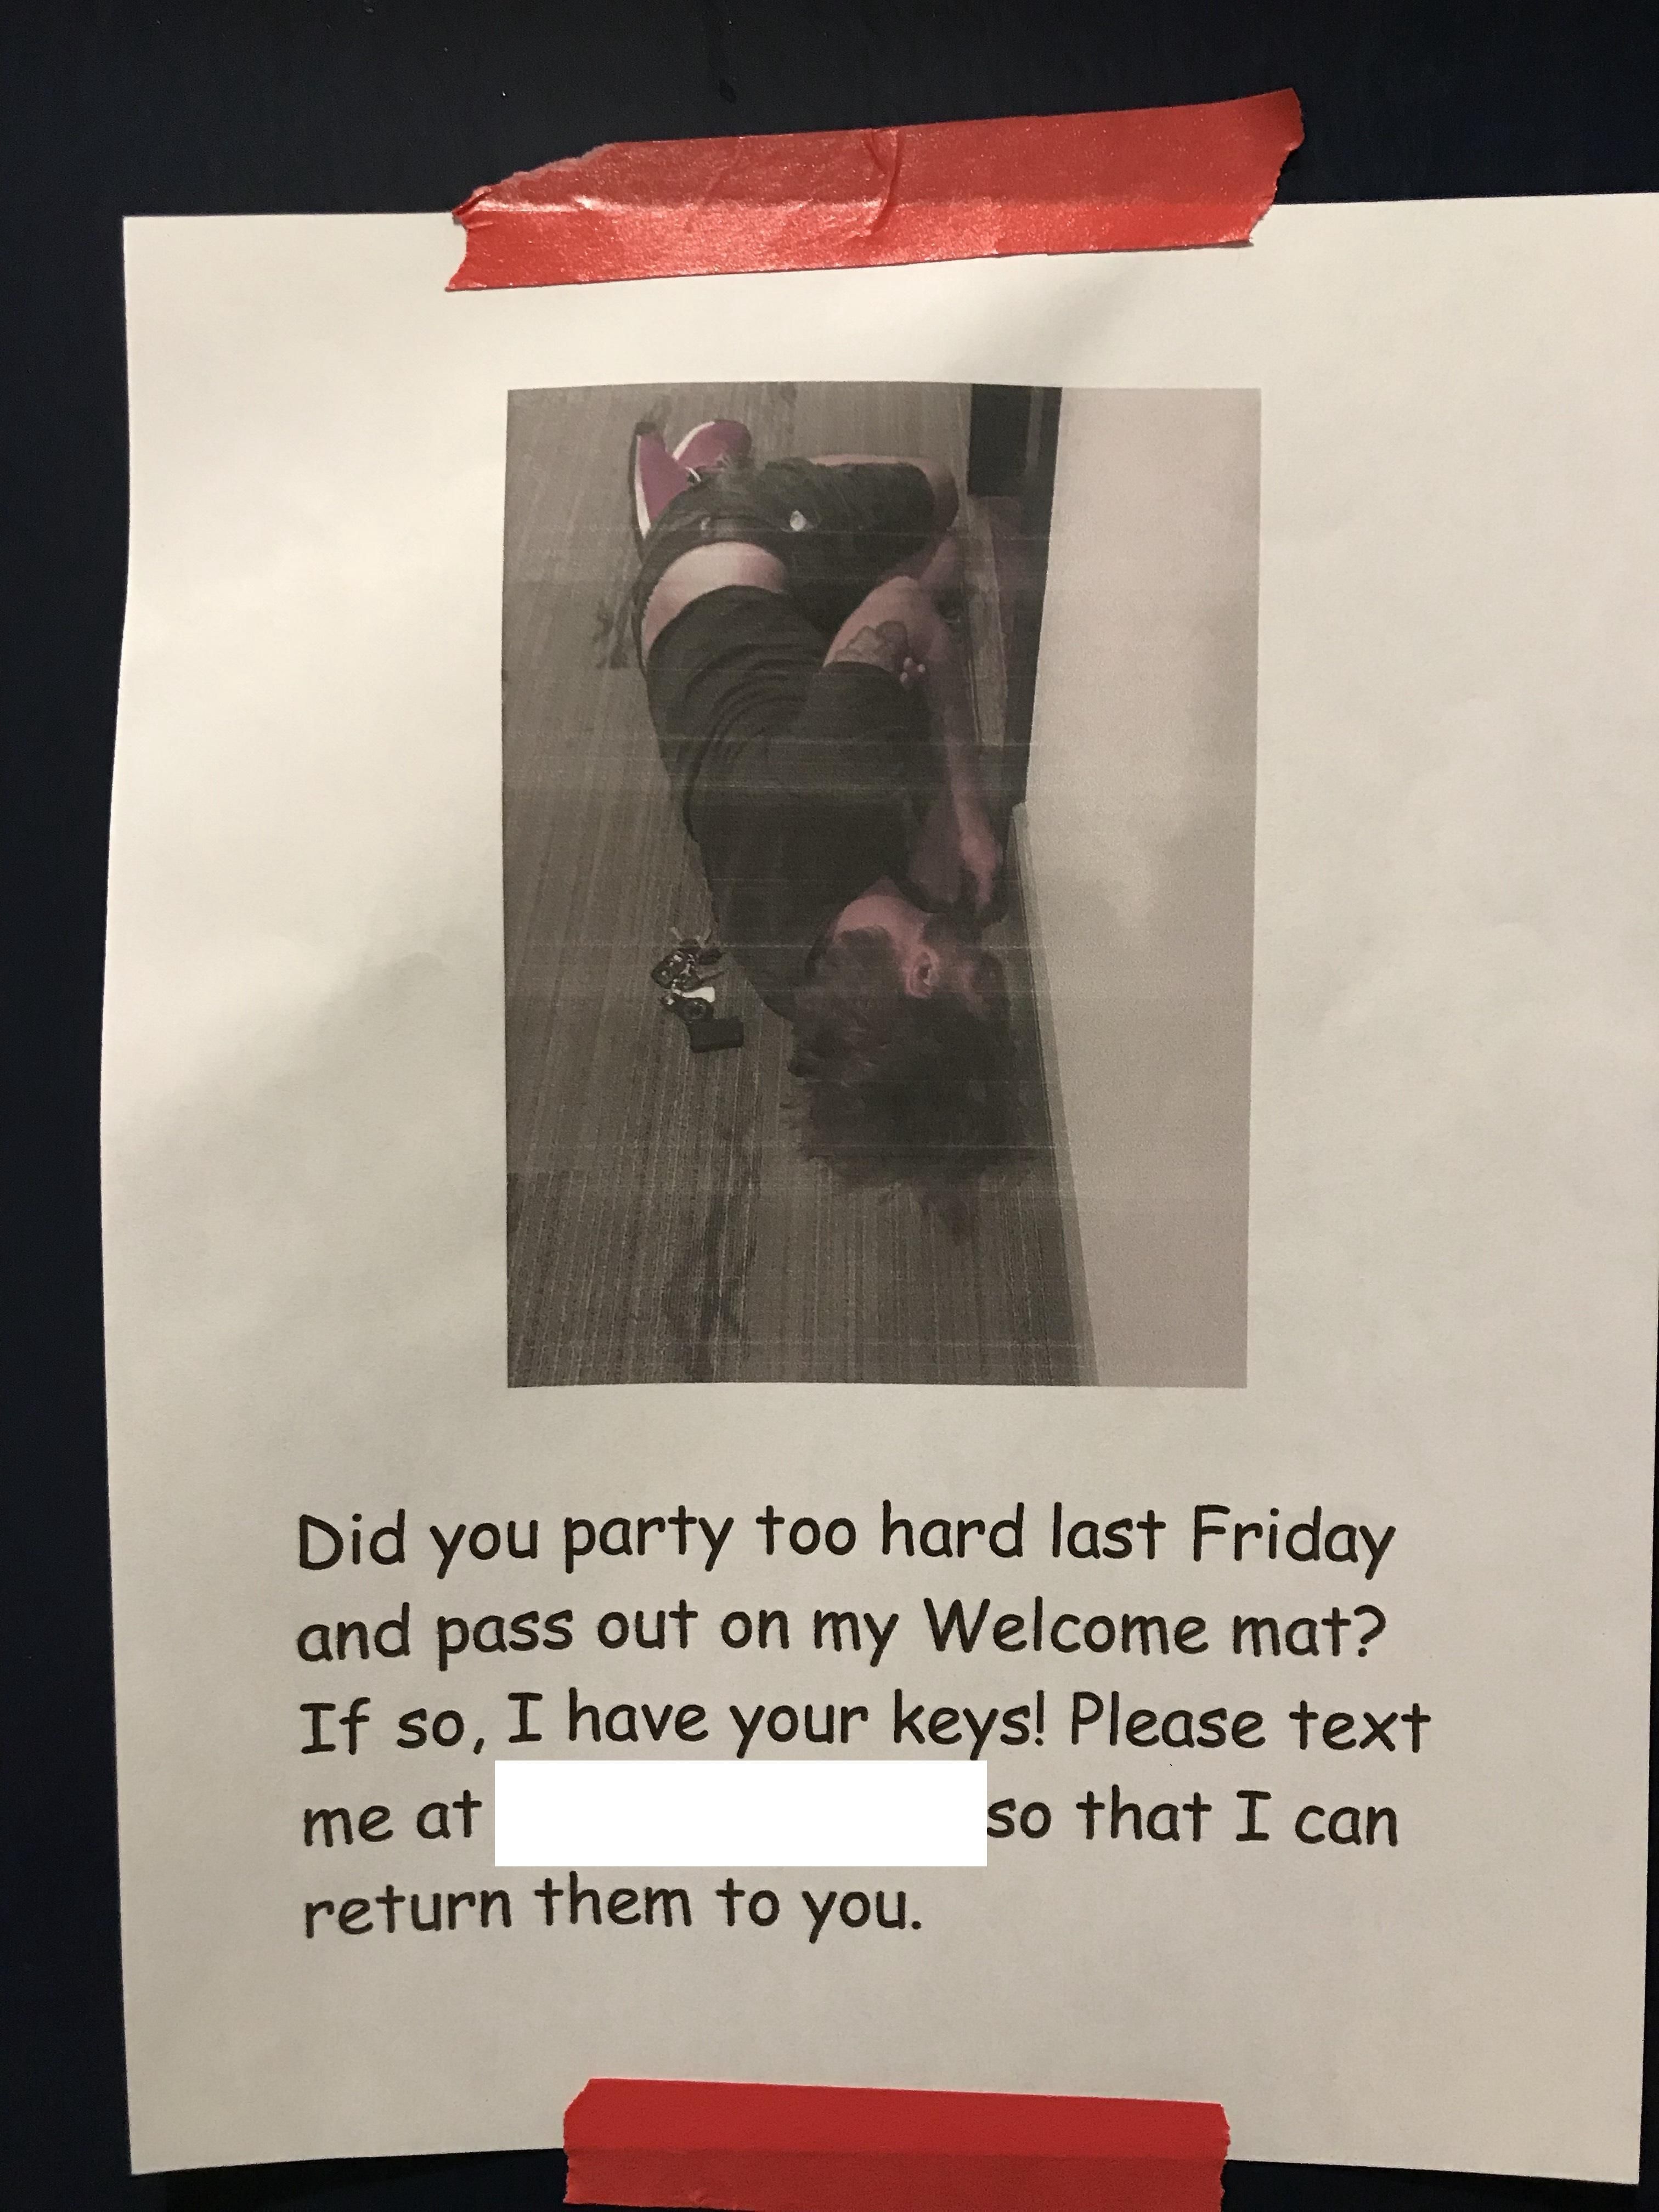 Found this posted up in my apartment complex